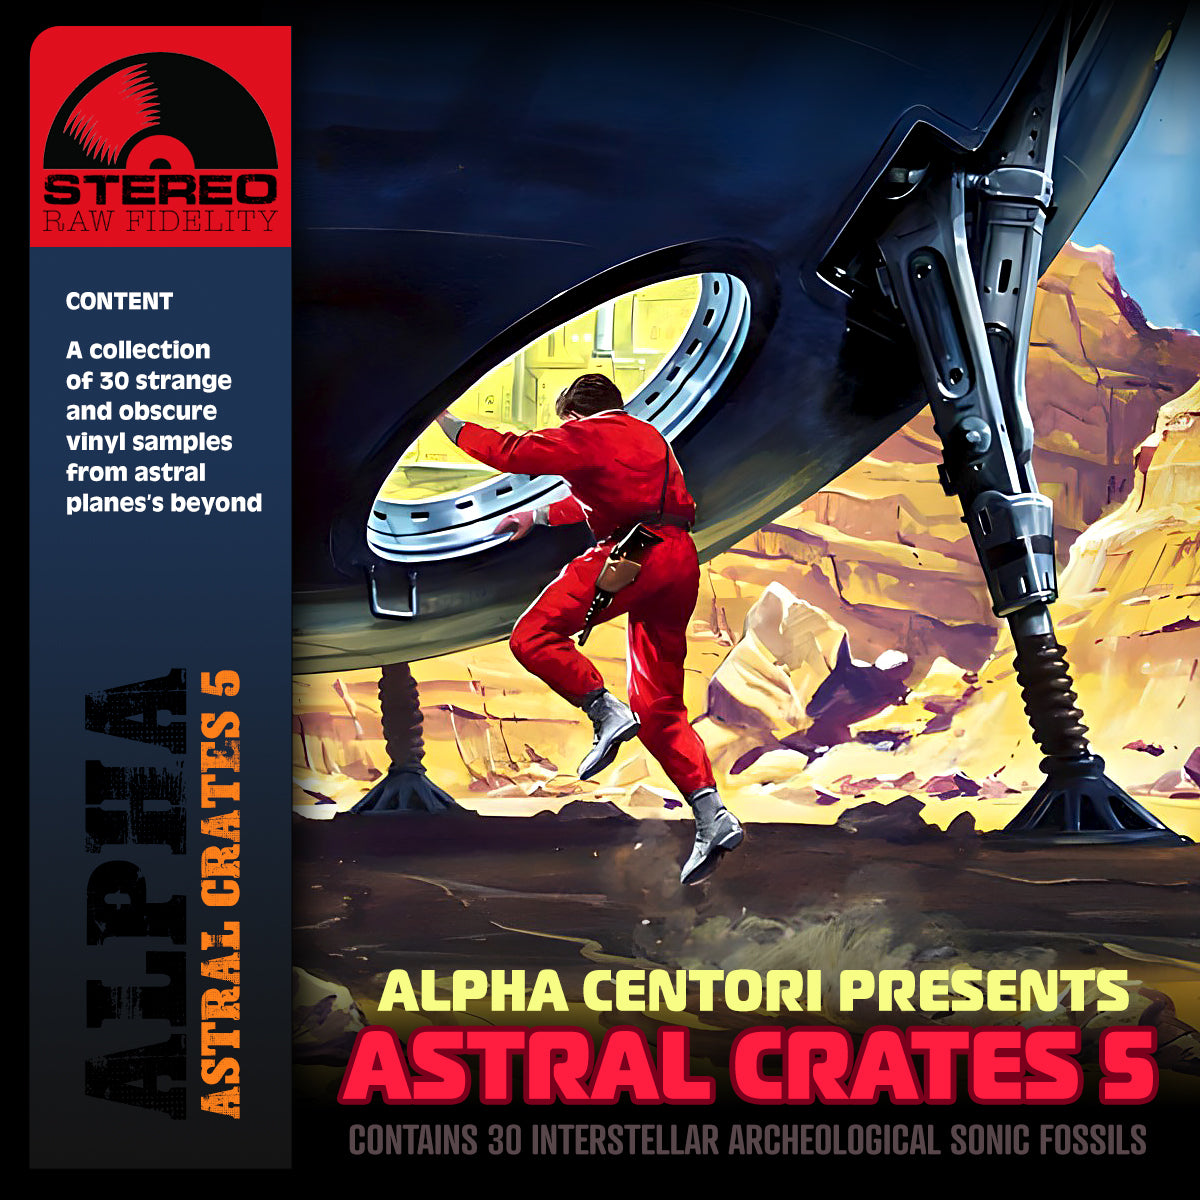 Astral Crates 5